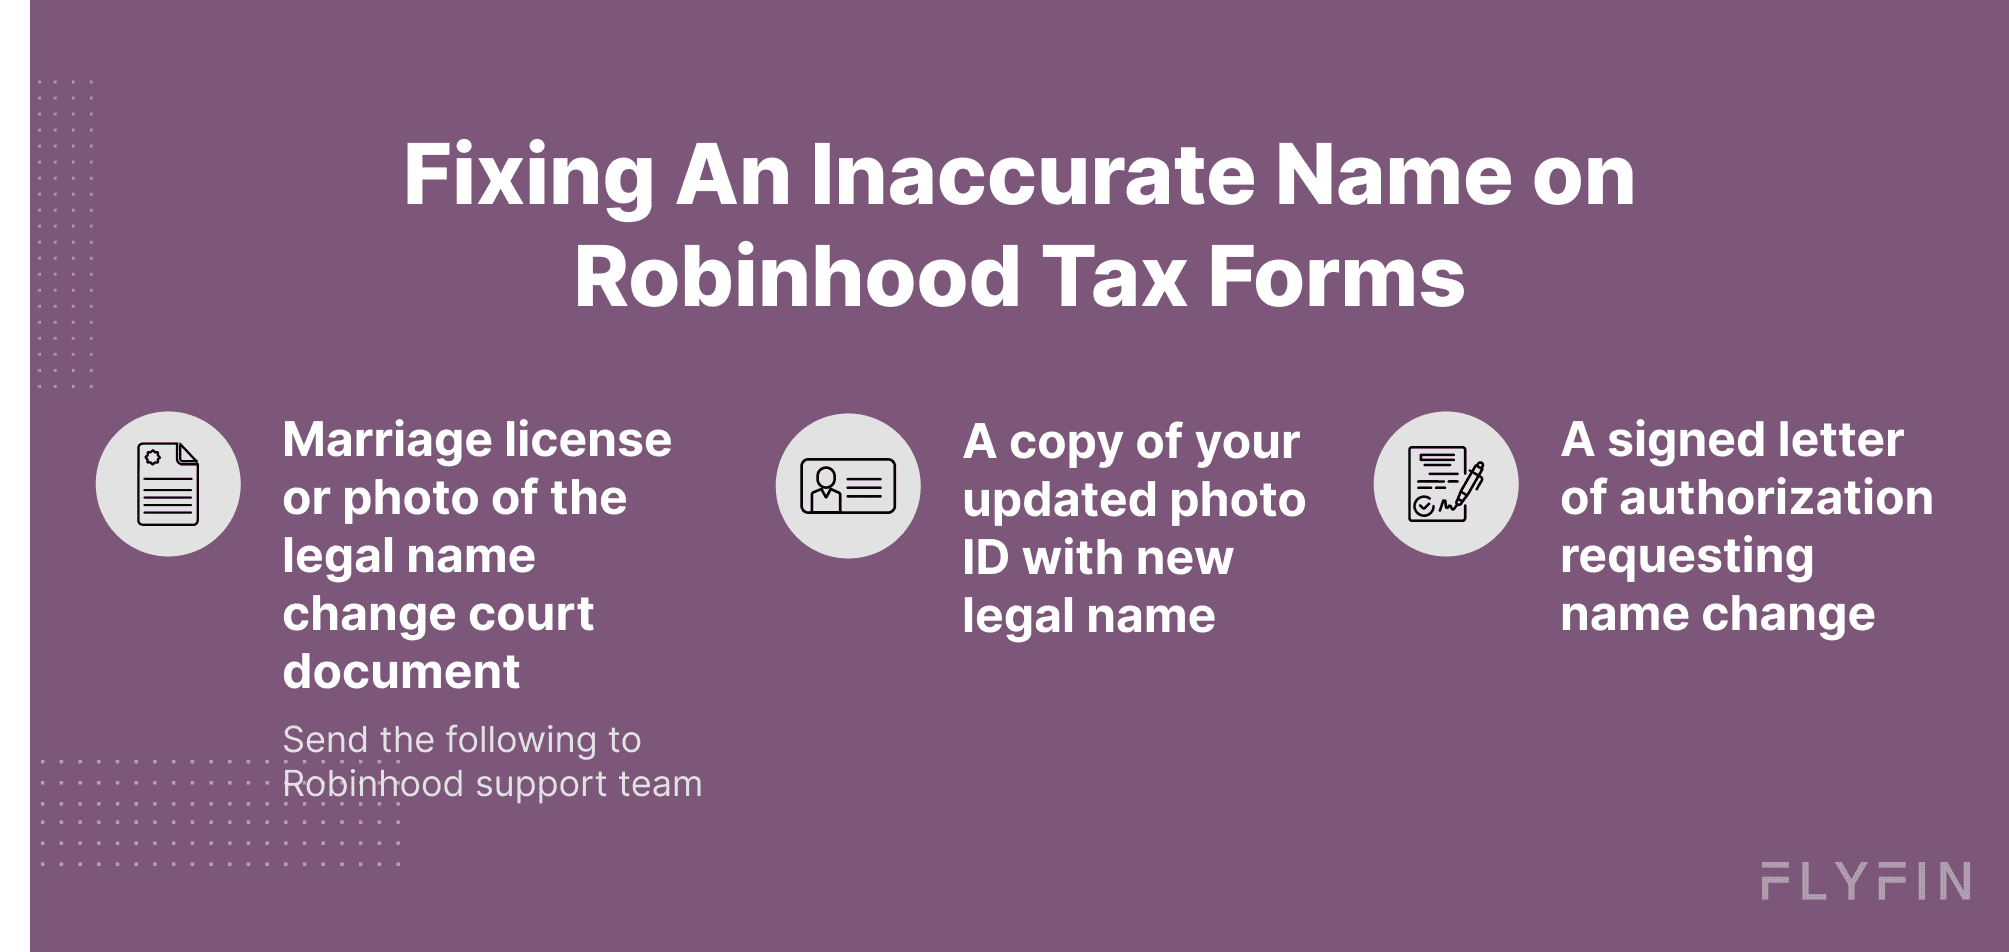 Image shows steps to fix an inaccurate name on Robinhood tax forms by submitting updated legal documents and signed authorization letter to support team.